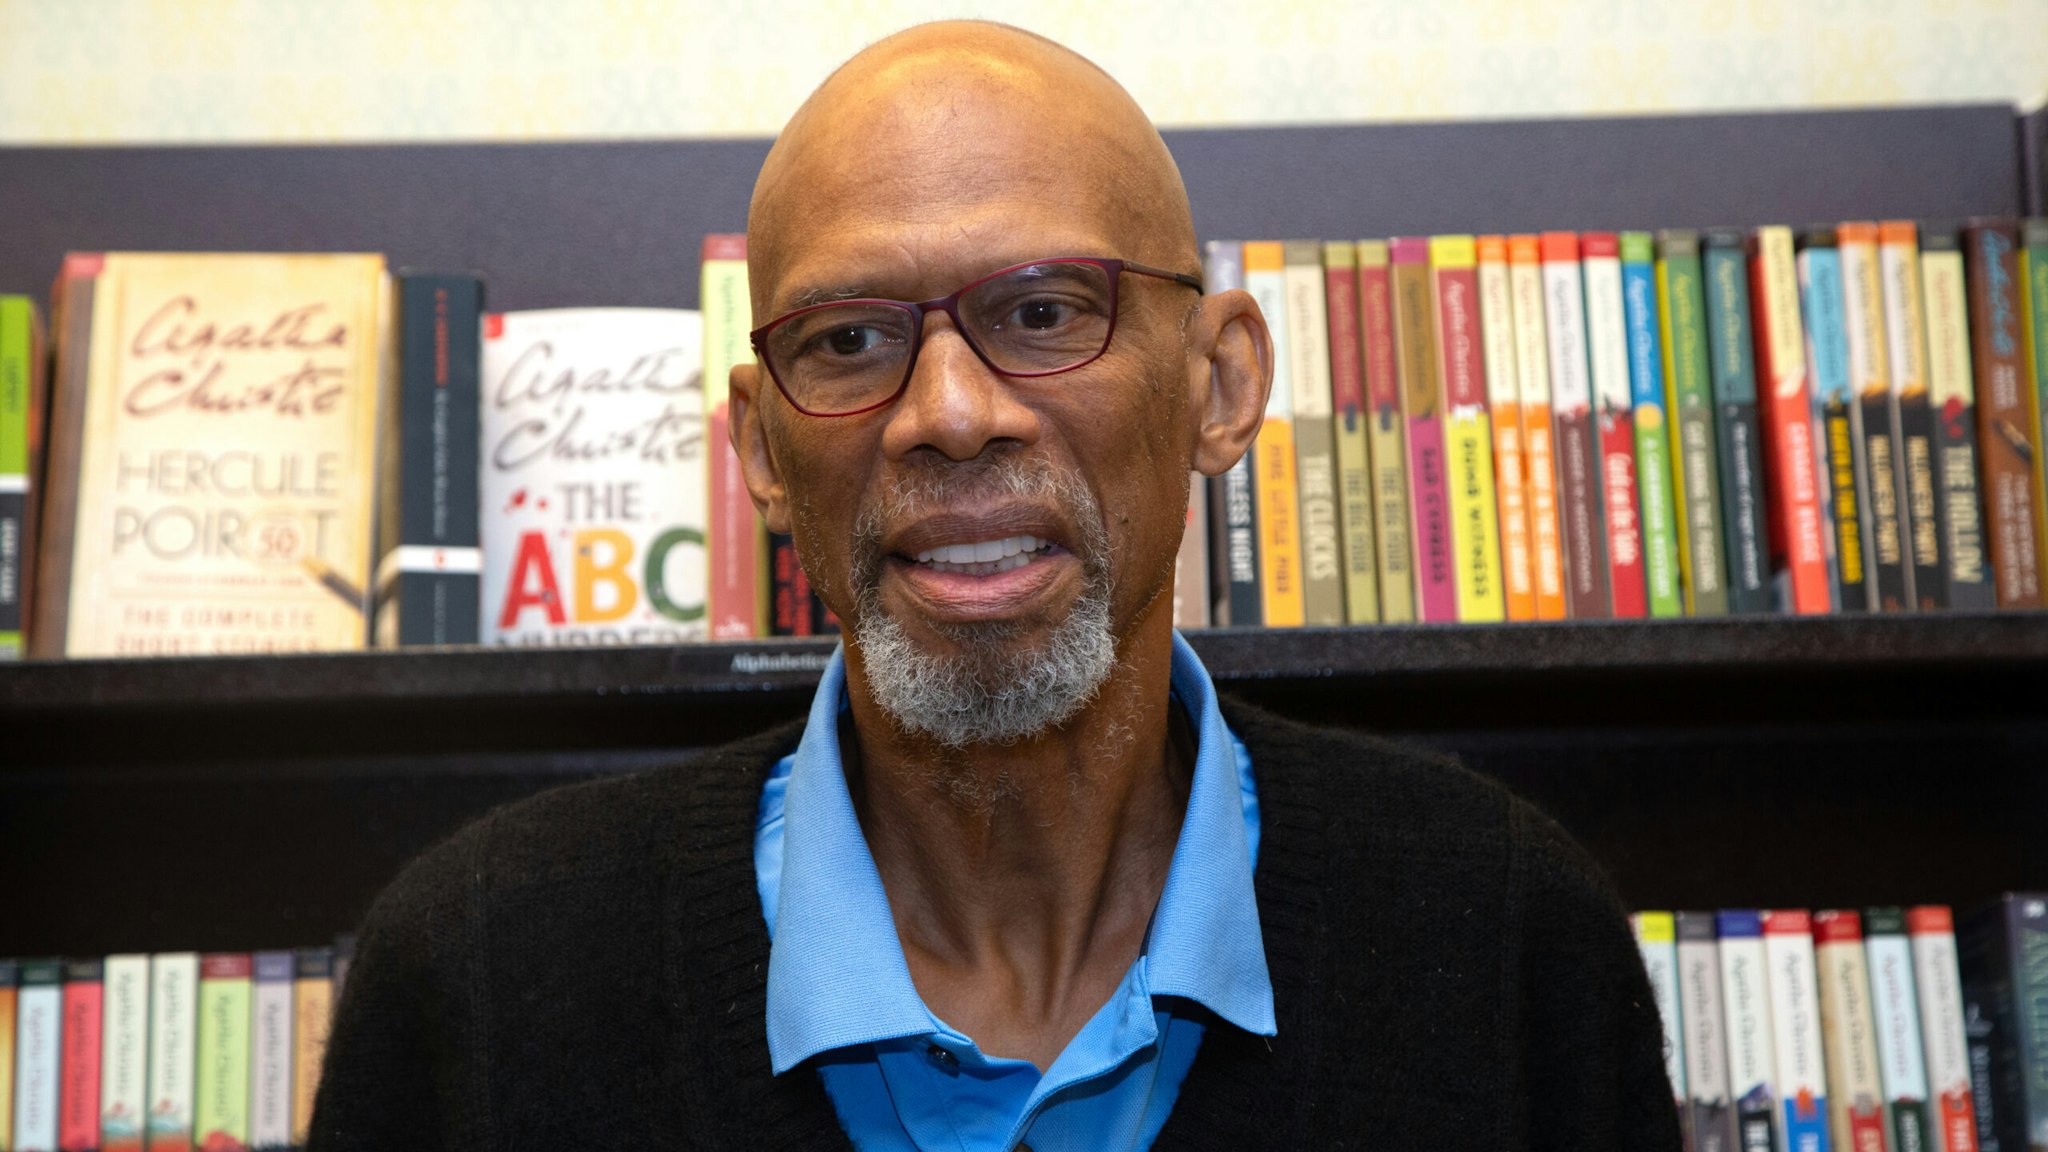 OS ANGELES, CALIFORNIA - SEPTEMBER 24: Kareem Abdul-Jabbar Celebrates New Book "The Empty Birdcage" at Barnes & Noble at The Grove on September 24, 2019 in Los Angeles, California. (Photo by Gabriel Olsen/Getty Images)